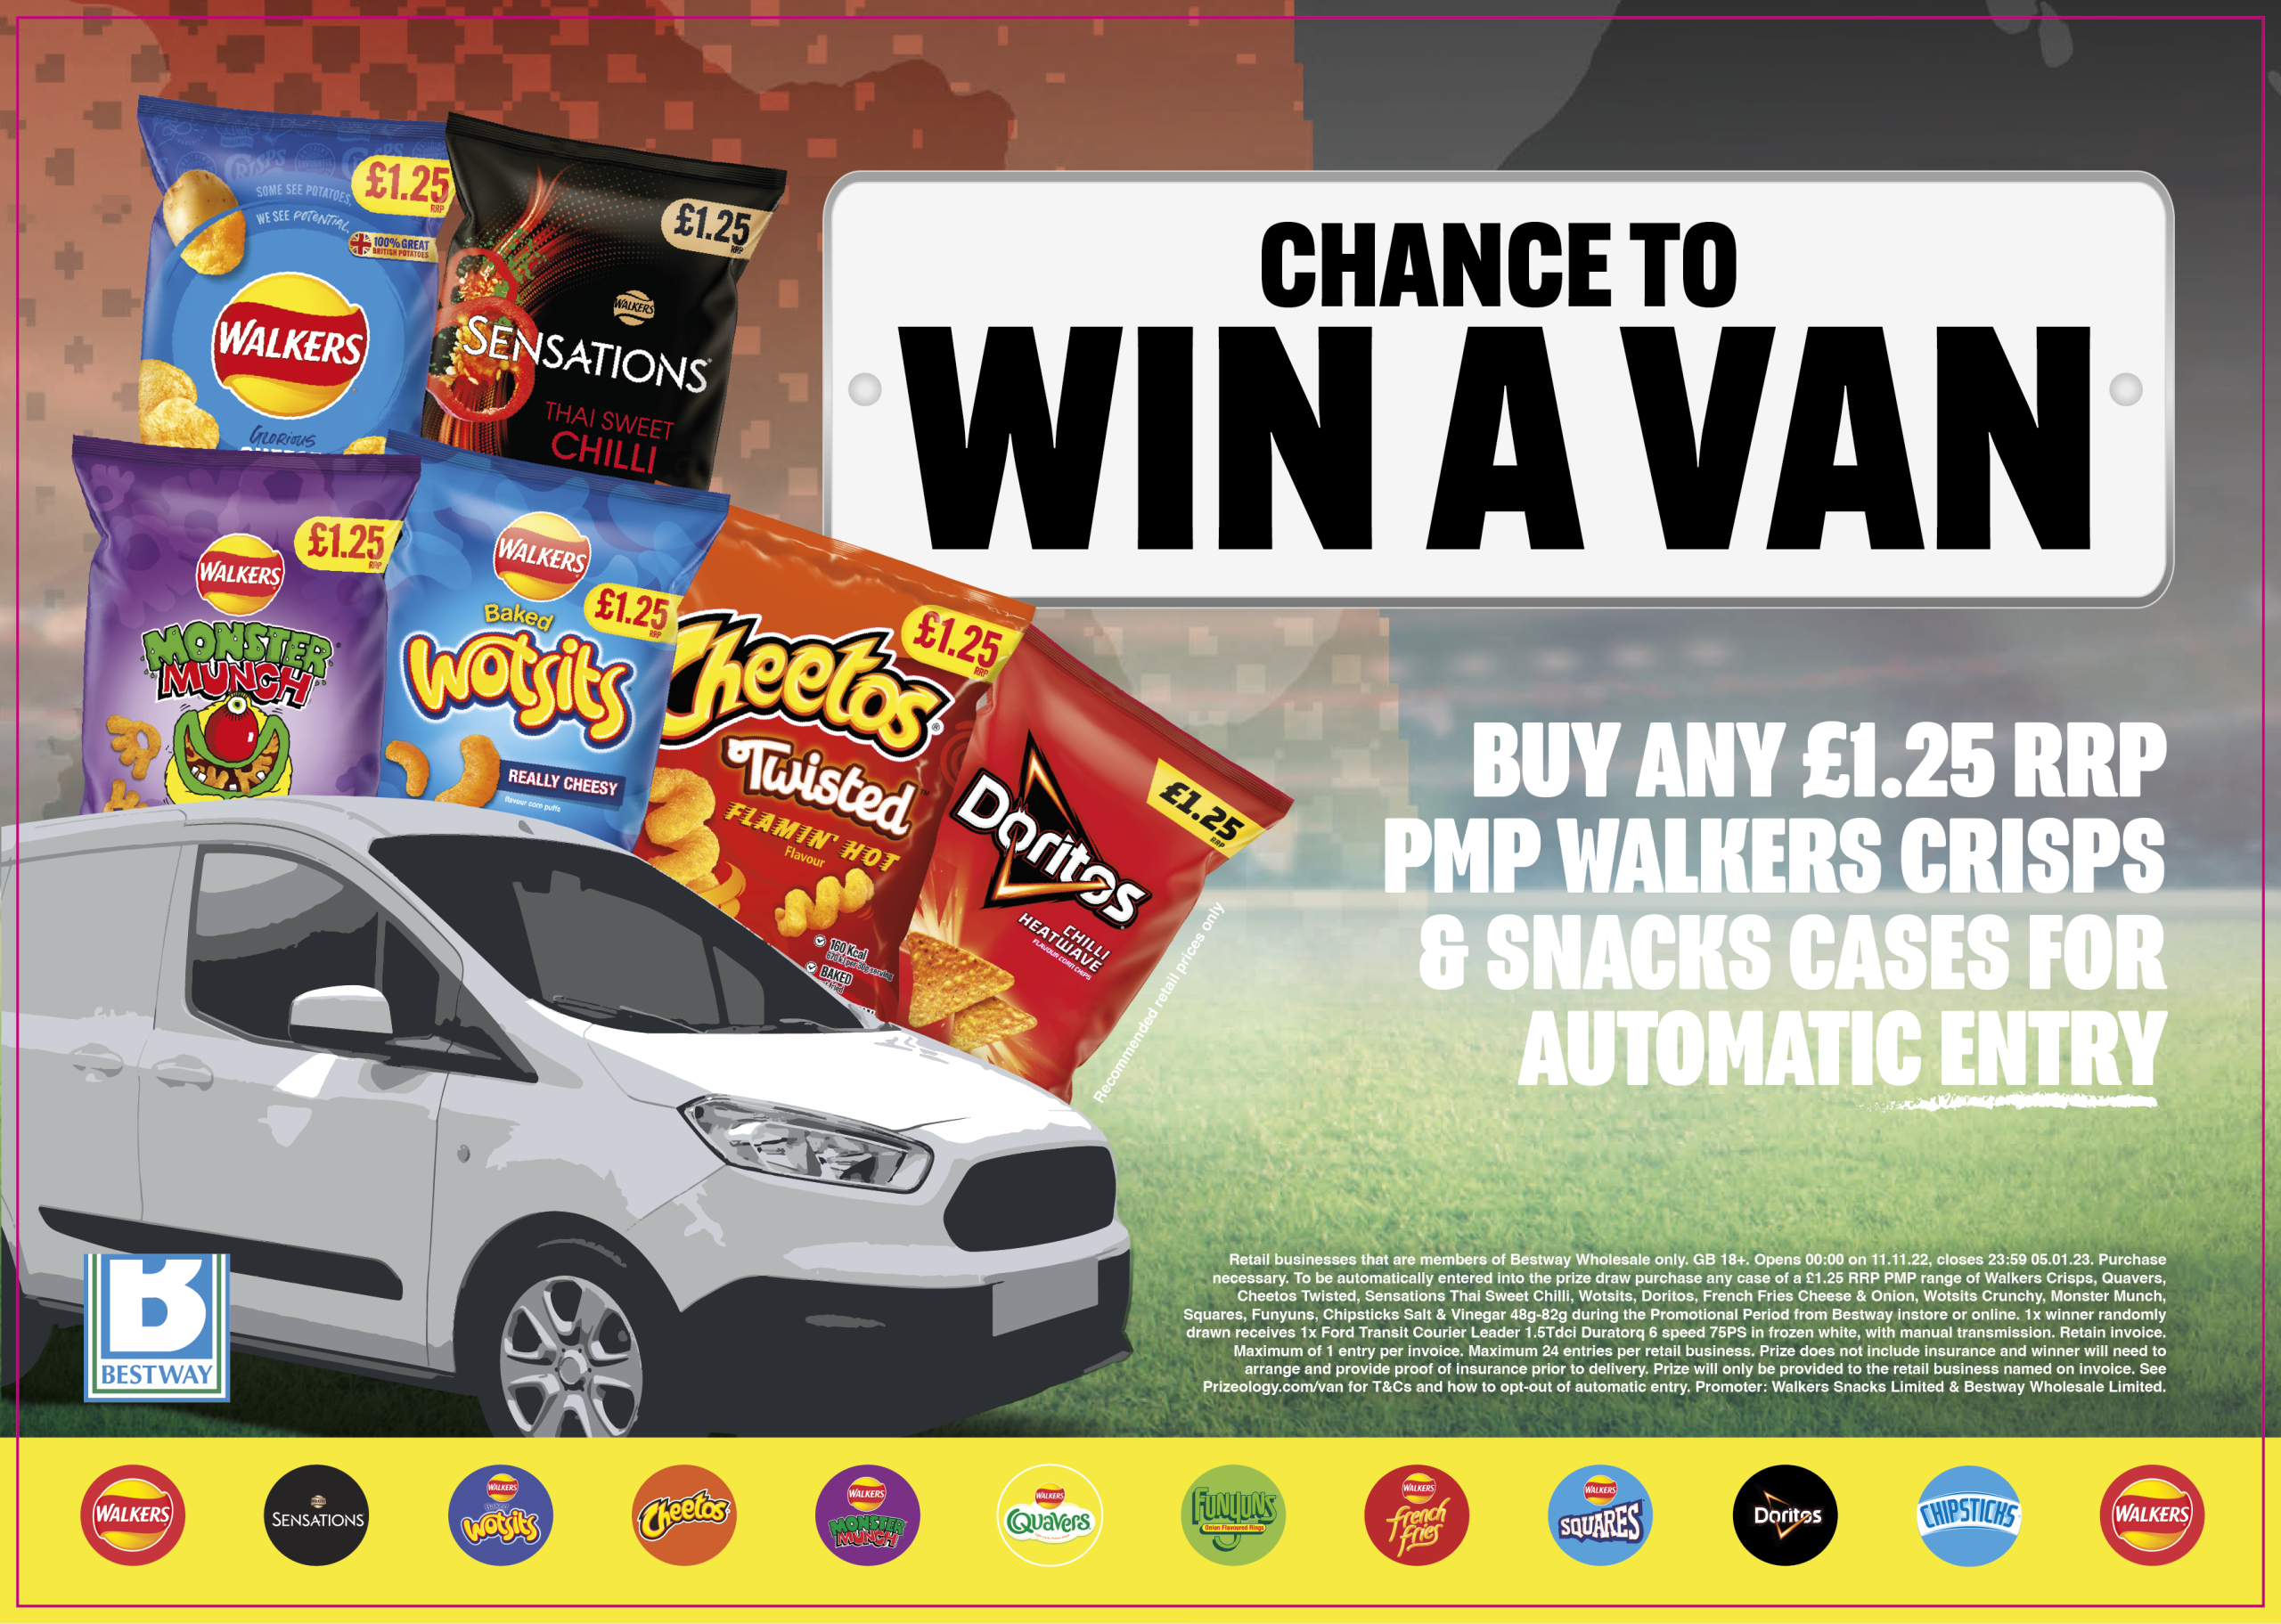 Win a Van – PepsiCo partners with Bestway to give back to retailers